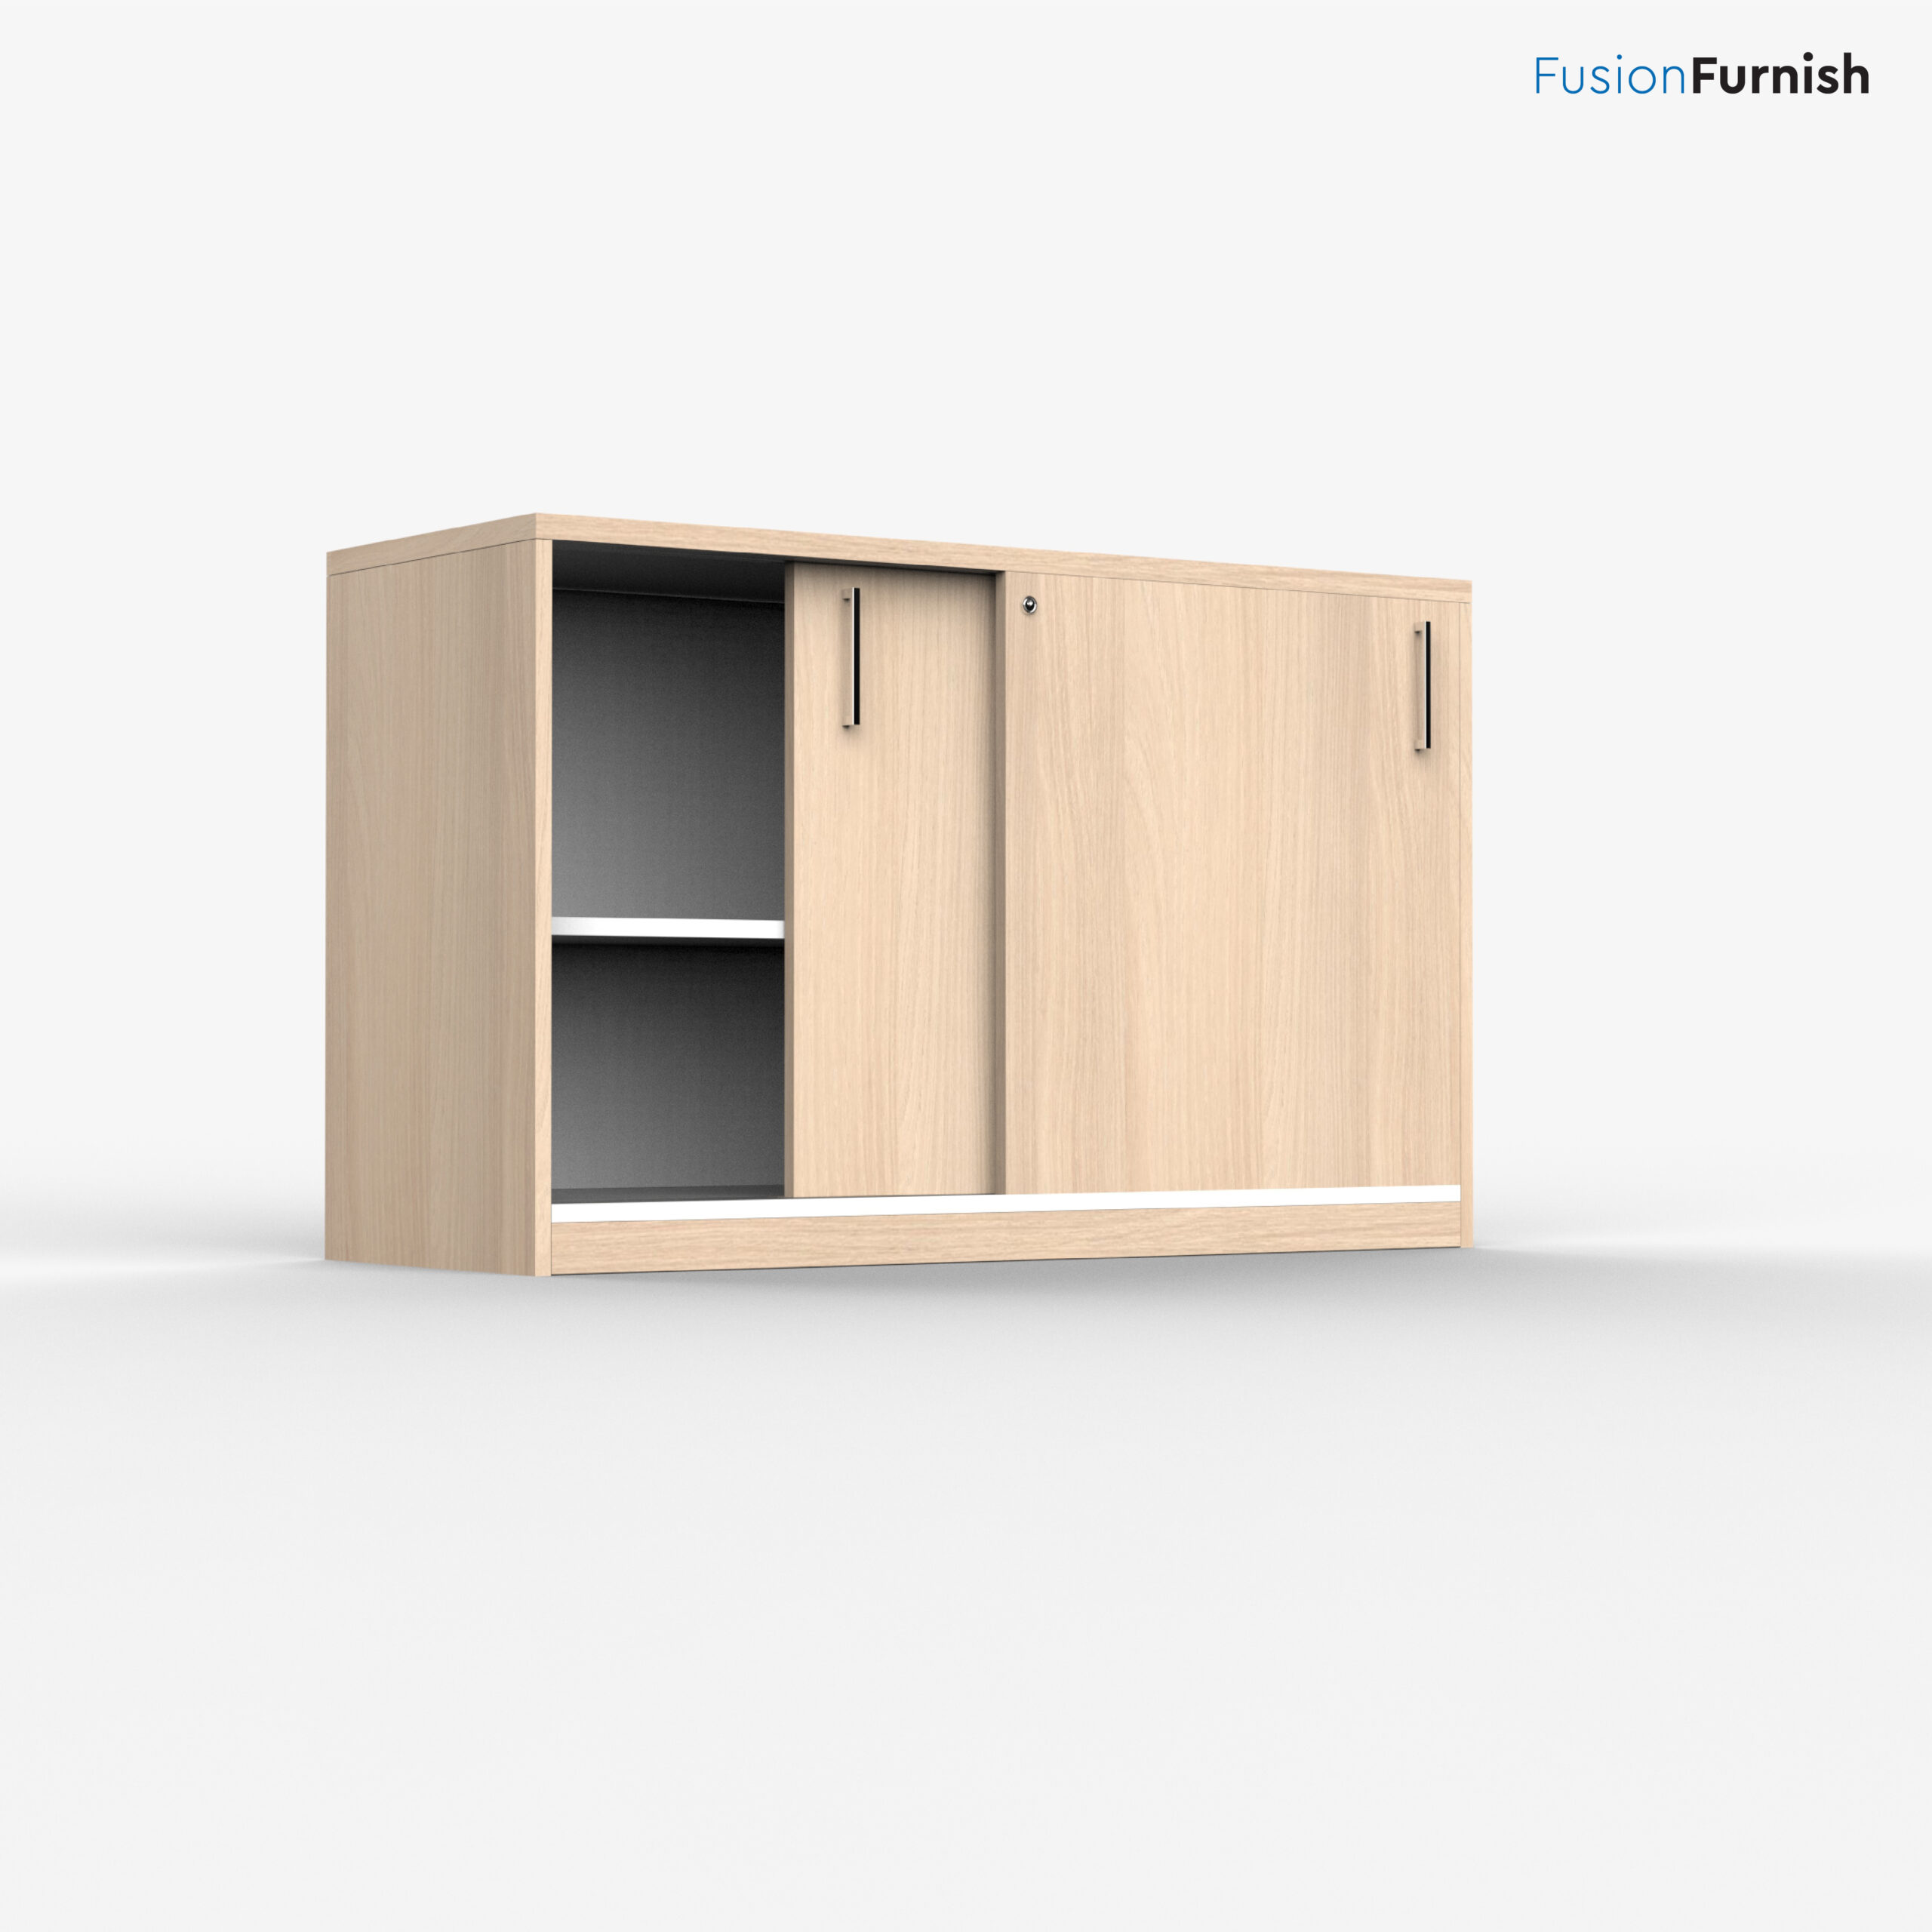 LOW FILING CABINETThe low filing cabinet is here to help. This functionally designed piece of storage furniture carefully built with durable materials and sliding door design that make organizing your workplace simple and effective.